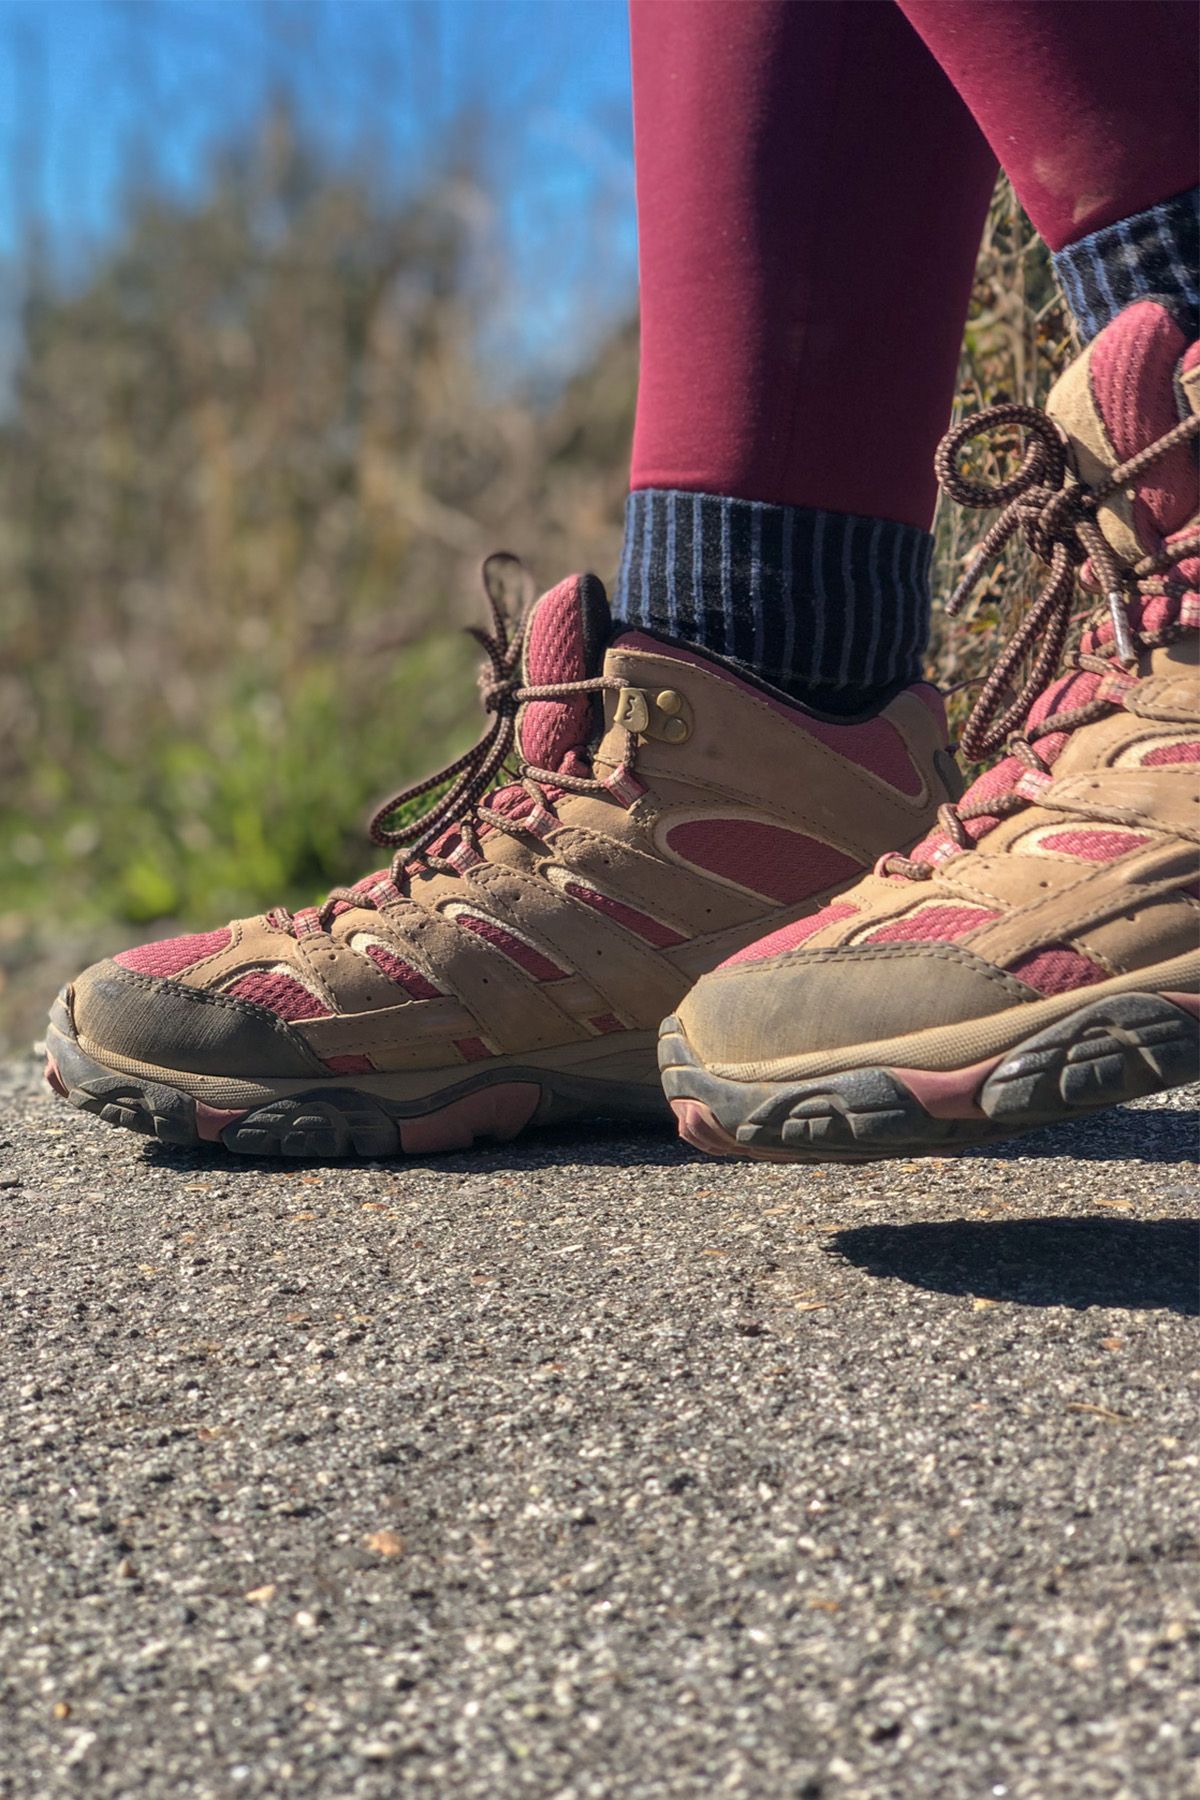 What Kind of Socks Do You Wear to Prevent Blisters While Hiking?